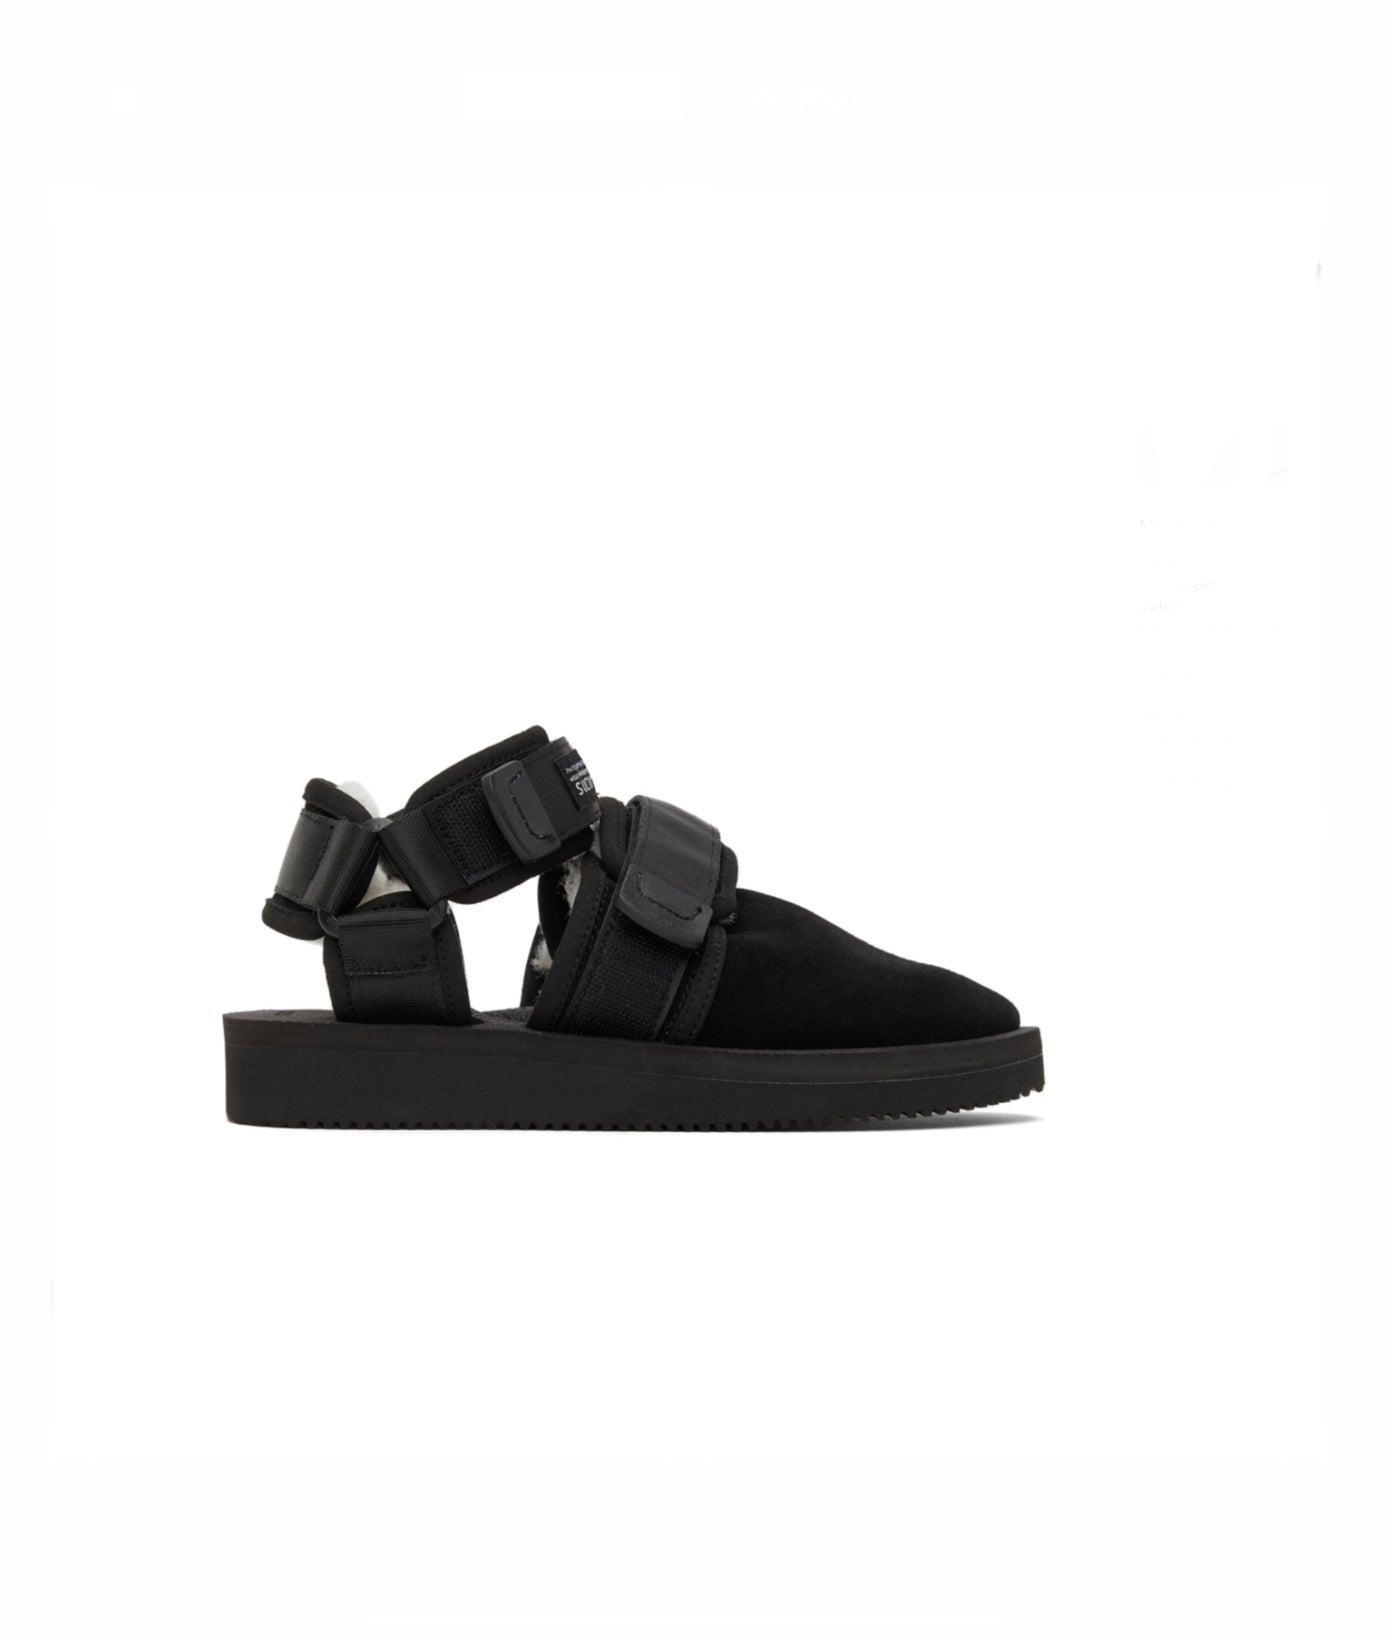 Load image into Gallery viewer, Suicoke Nots Black Suede Shearling Sandals - nib
